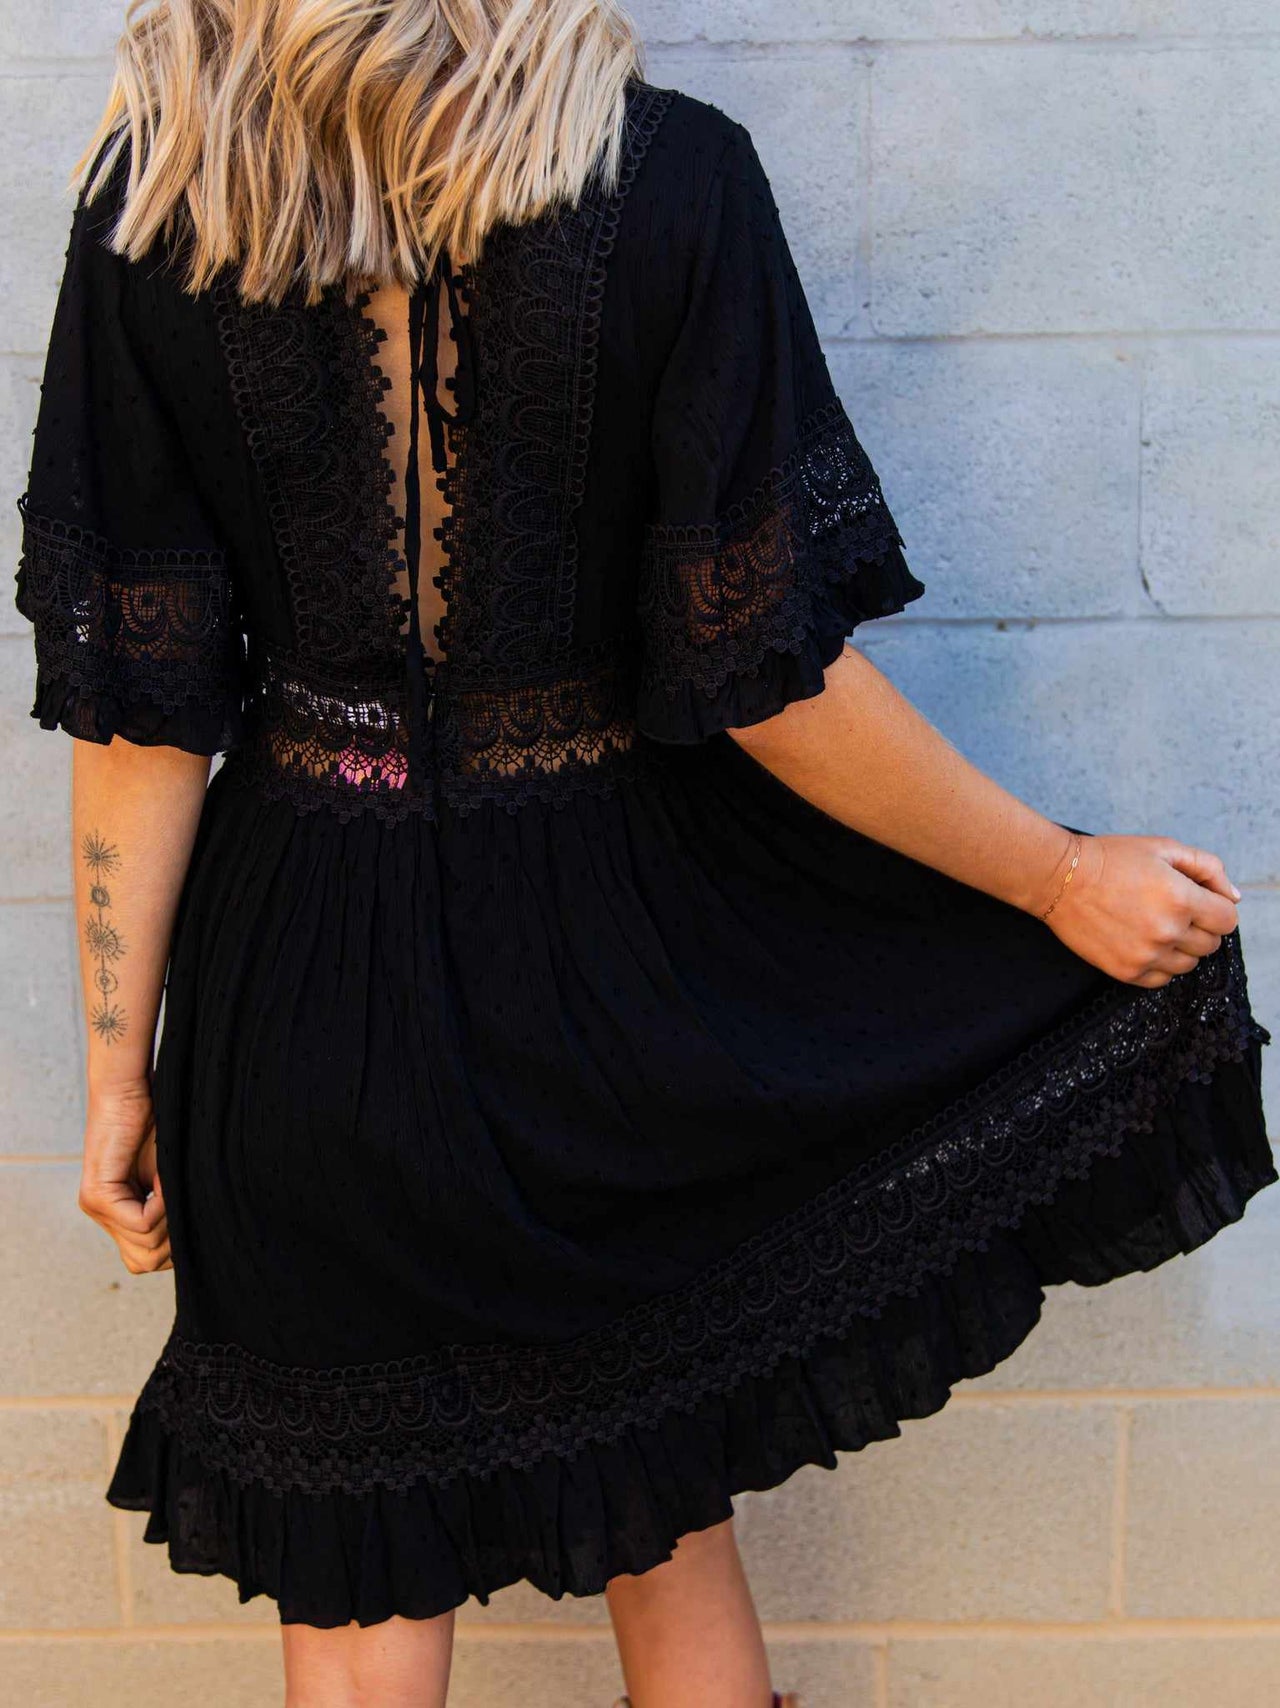 Picture Perfect Dress - Black-Dresses-Southern Fried Chics